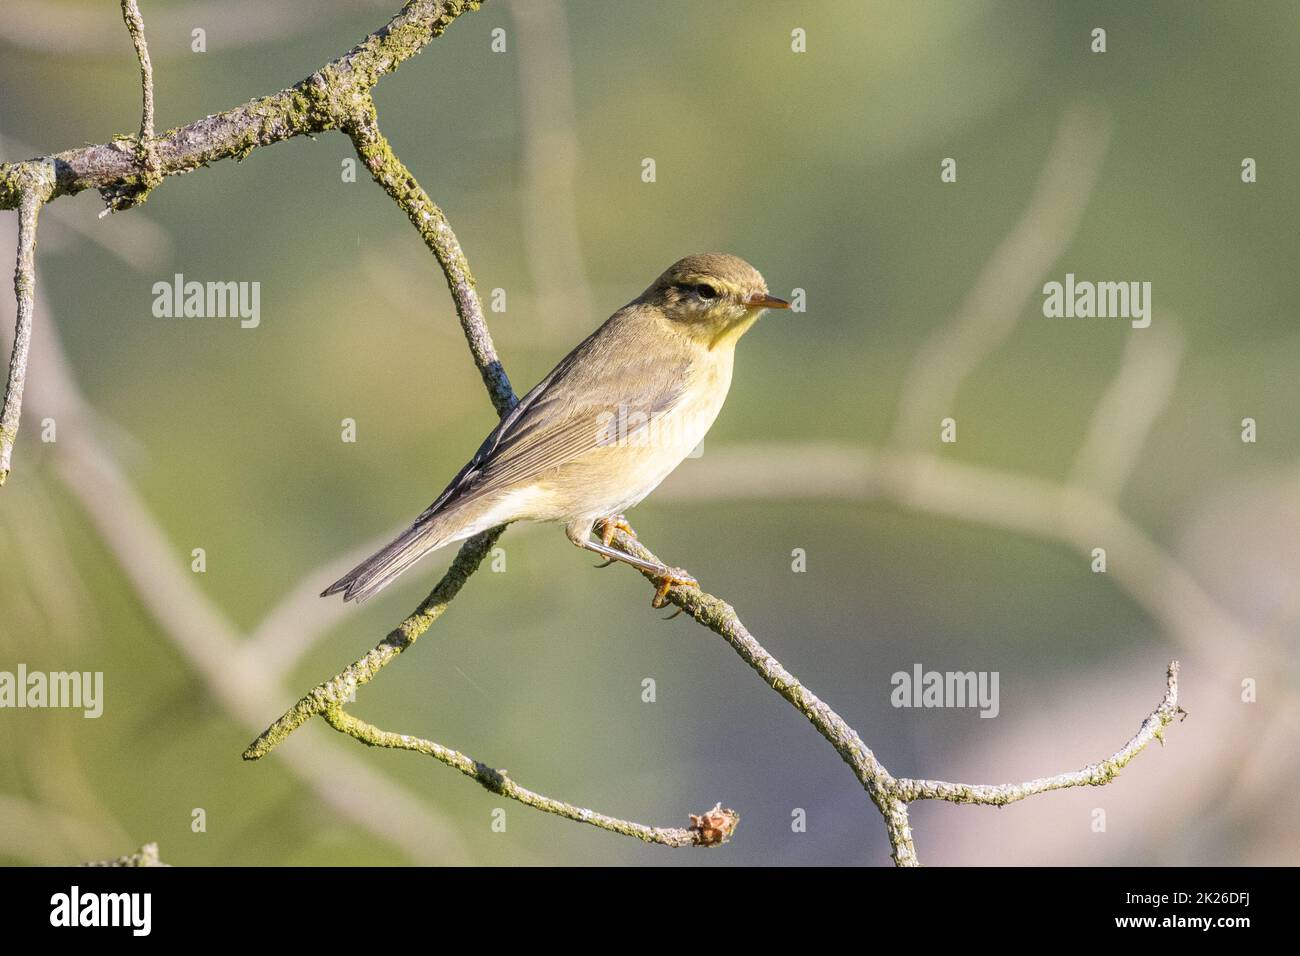 Willow warbler (Phylloscopus trochilus) siting on a tree branch, Yorkshire, UK Stock Photo